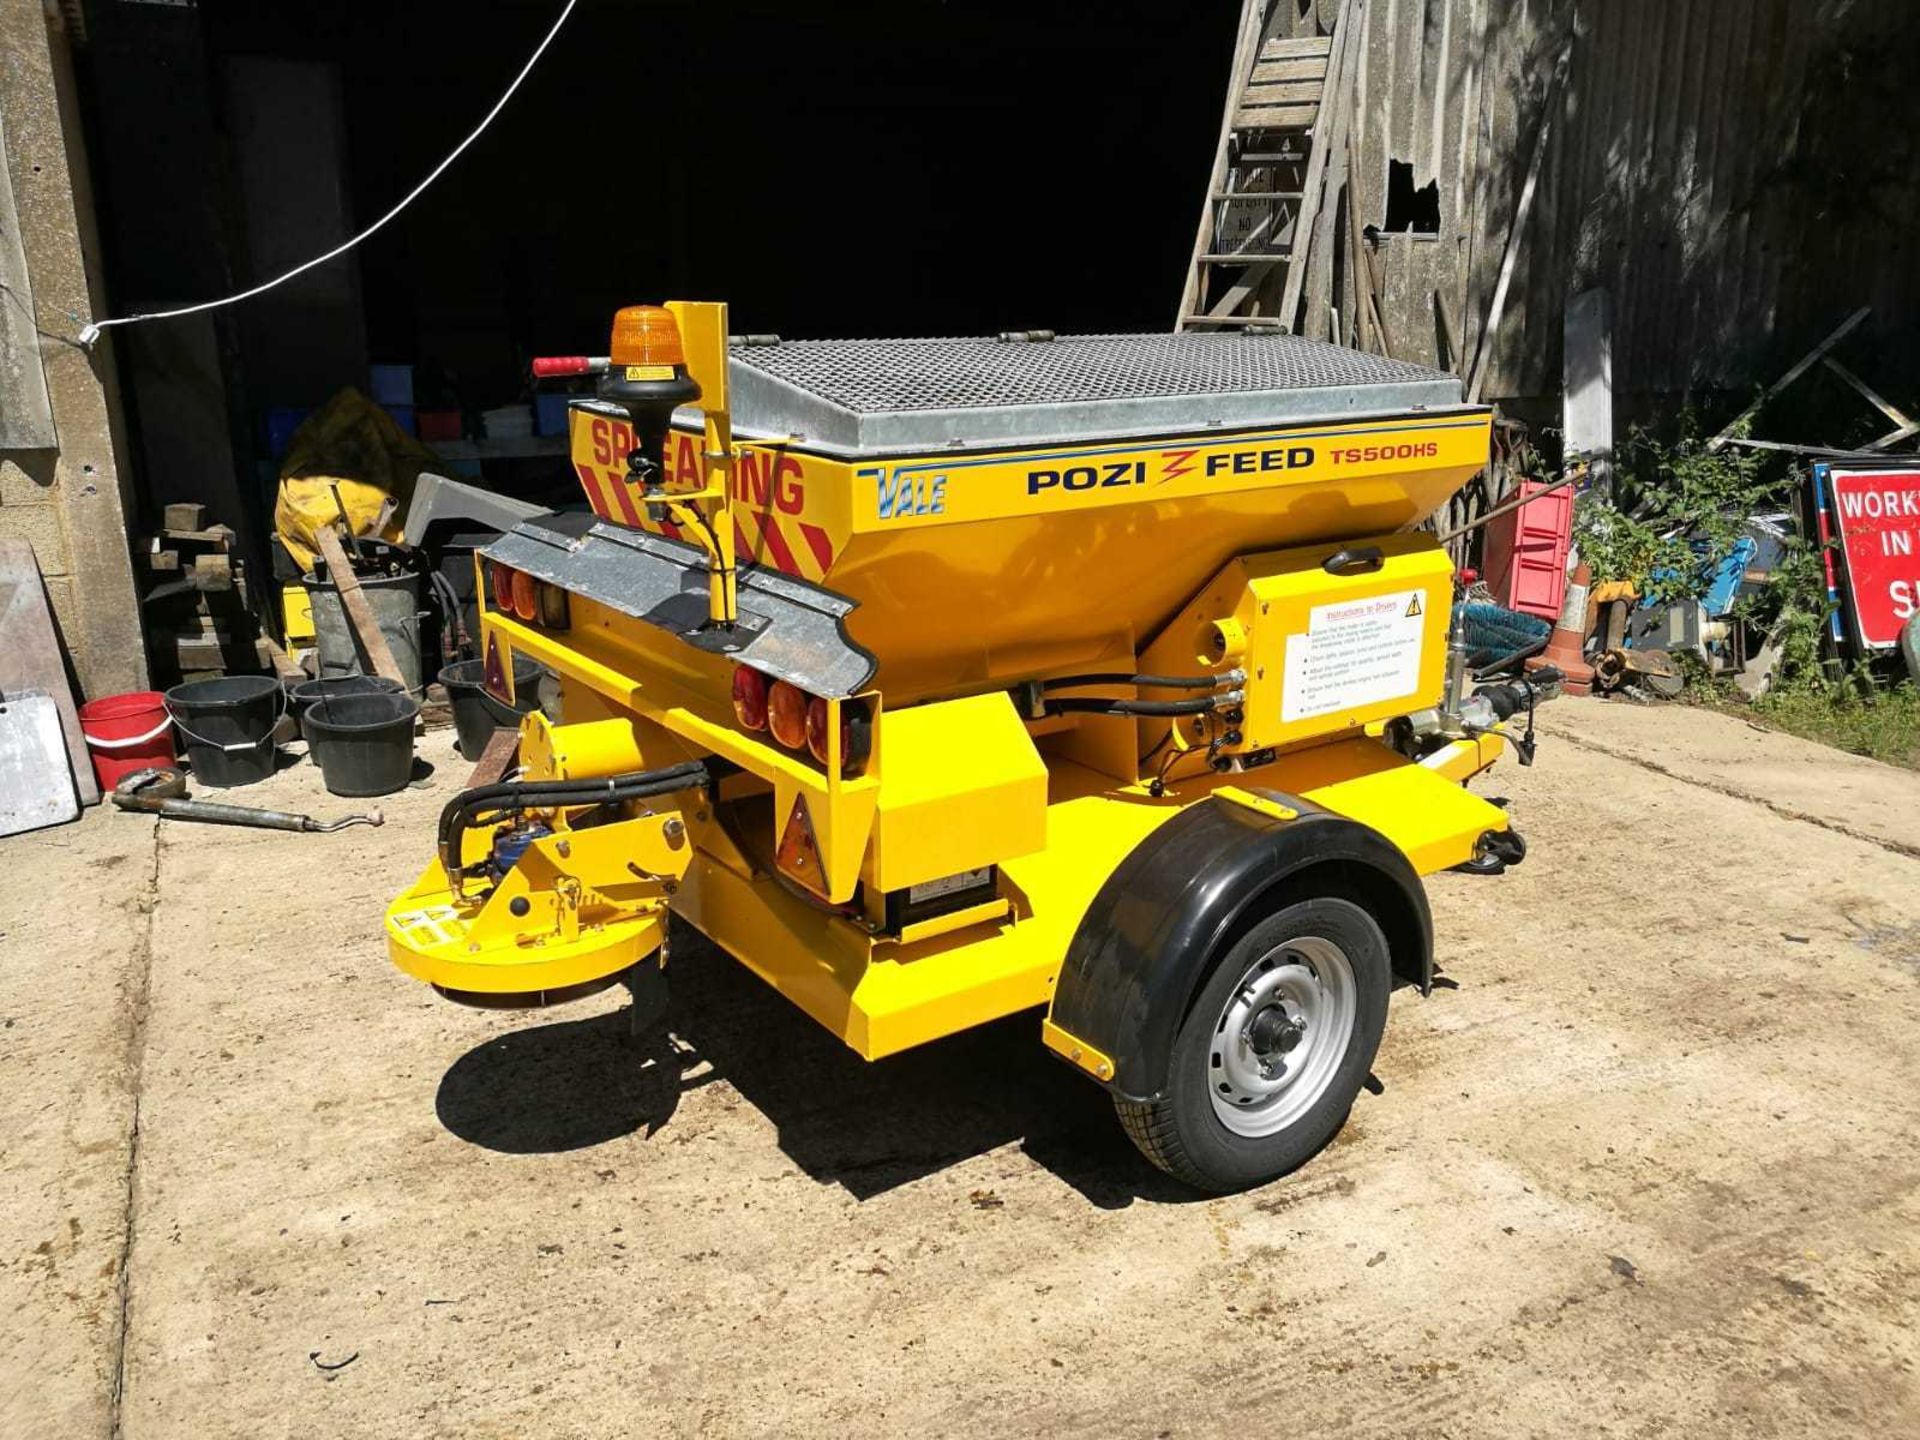 VALE POZI FEED TS500HS GRITTING TRAILER, SINGLE AXLE, 1300GTW *PLUS VAT* - Image 2 of 12